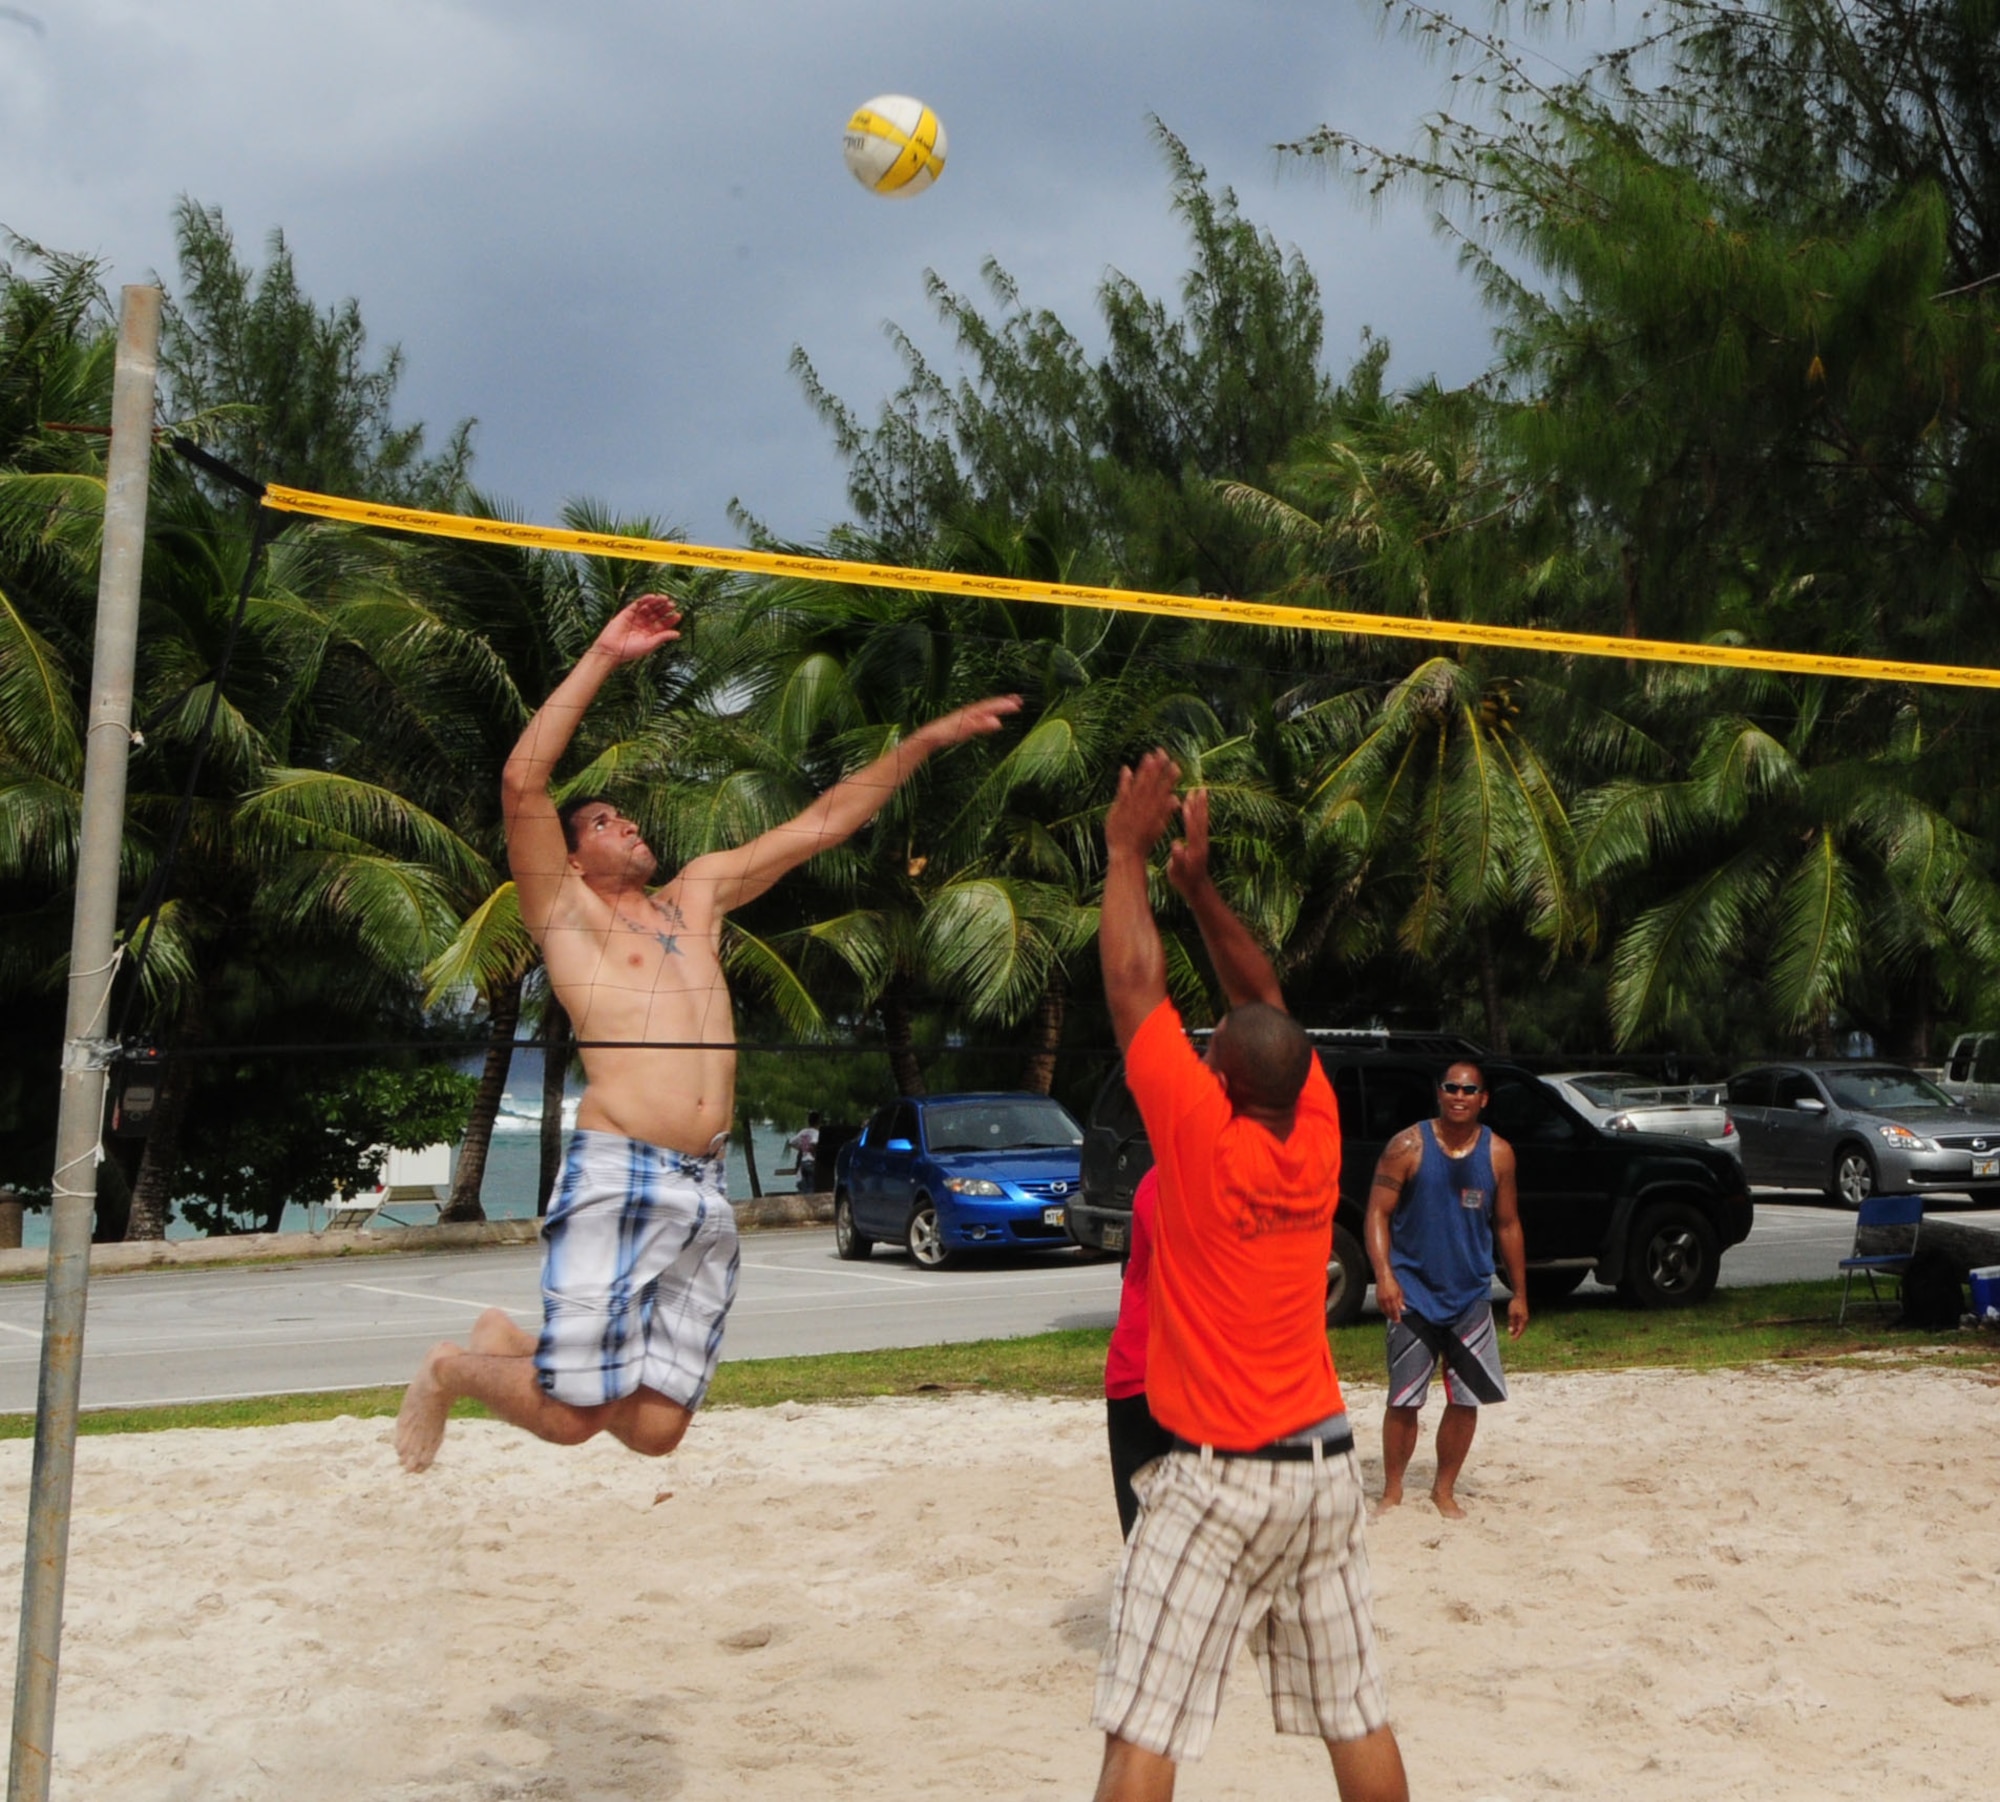 ANDERSEN AIR FORCE BASE, Guam - Airmen challenge each other in a game of volleyball Oct. 9 at Tarague Beach here.  The volleyball tournament was one of many activities Airmen could take part in during the Junior Enlisted Appreciation Day. (U.S. Air Force photo by Airman 1st Class Julian North)
